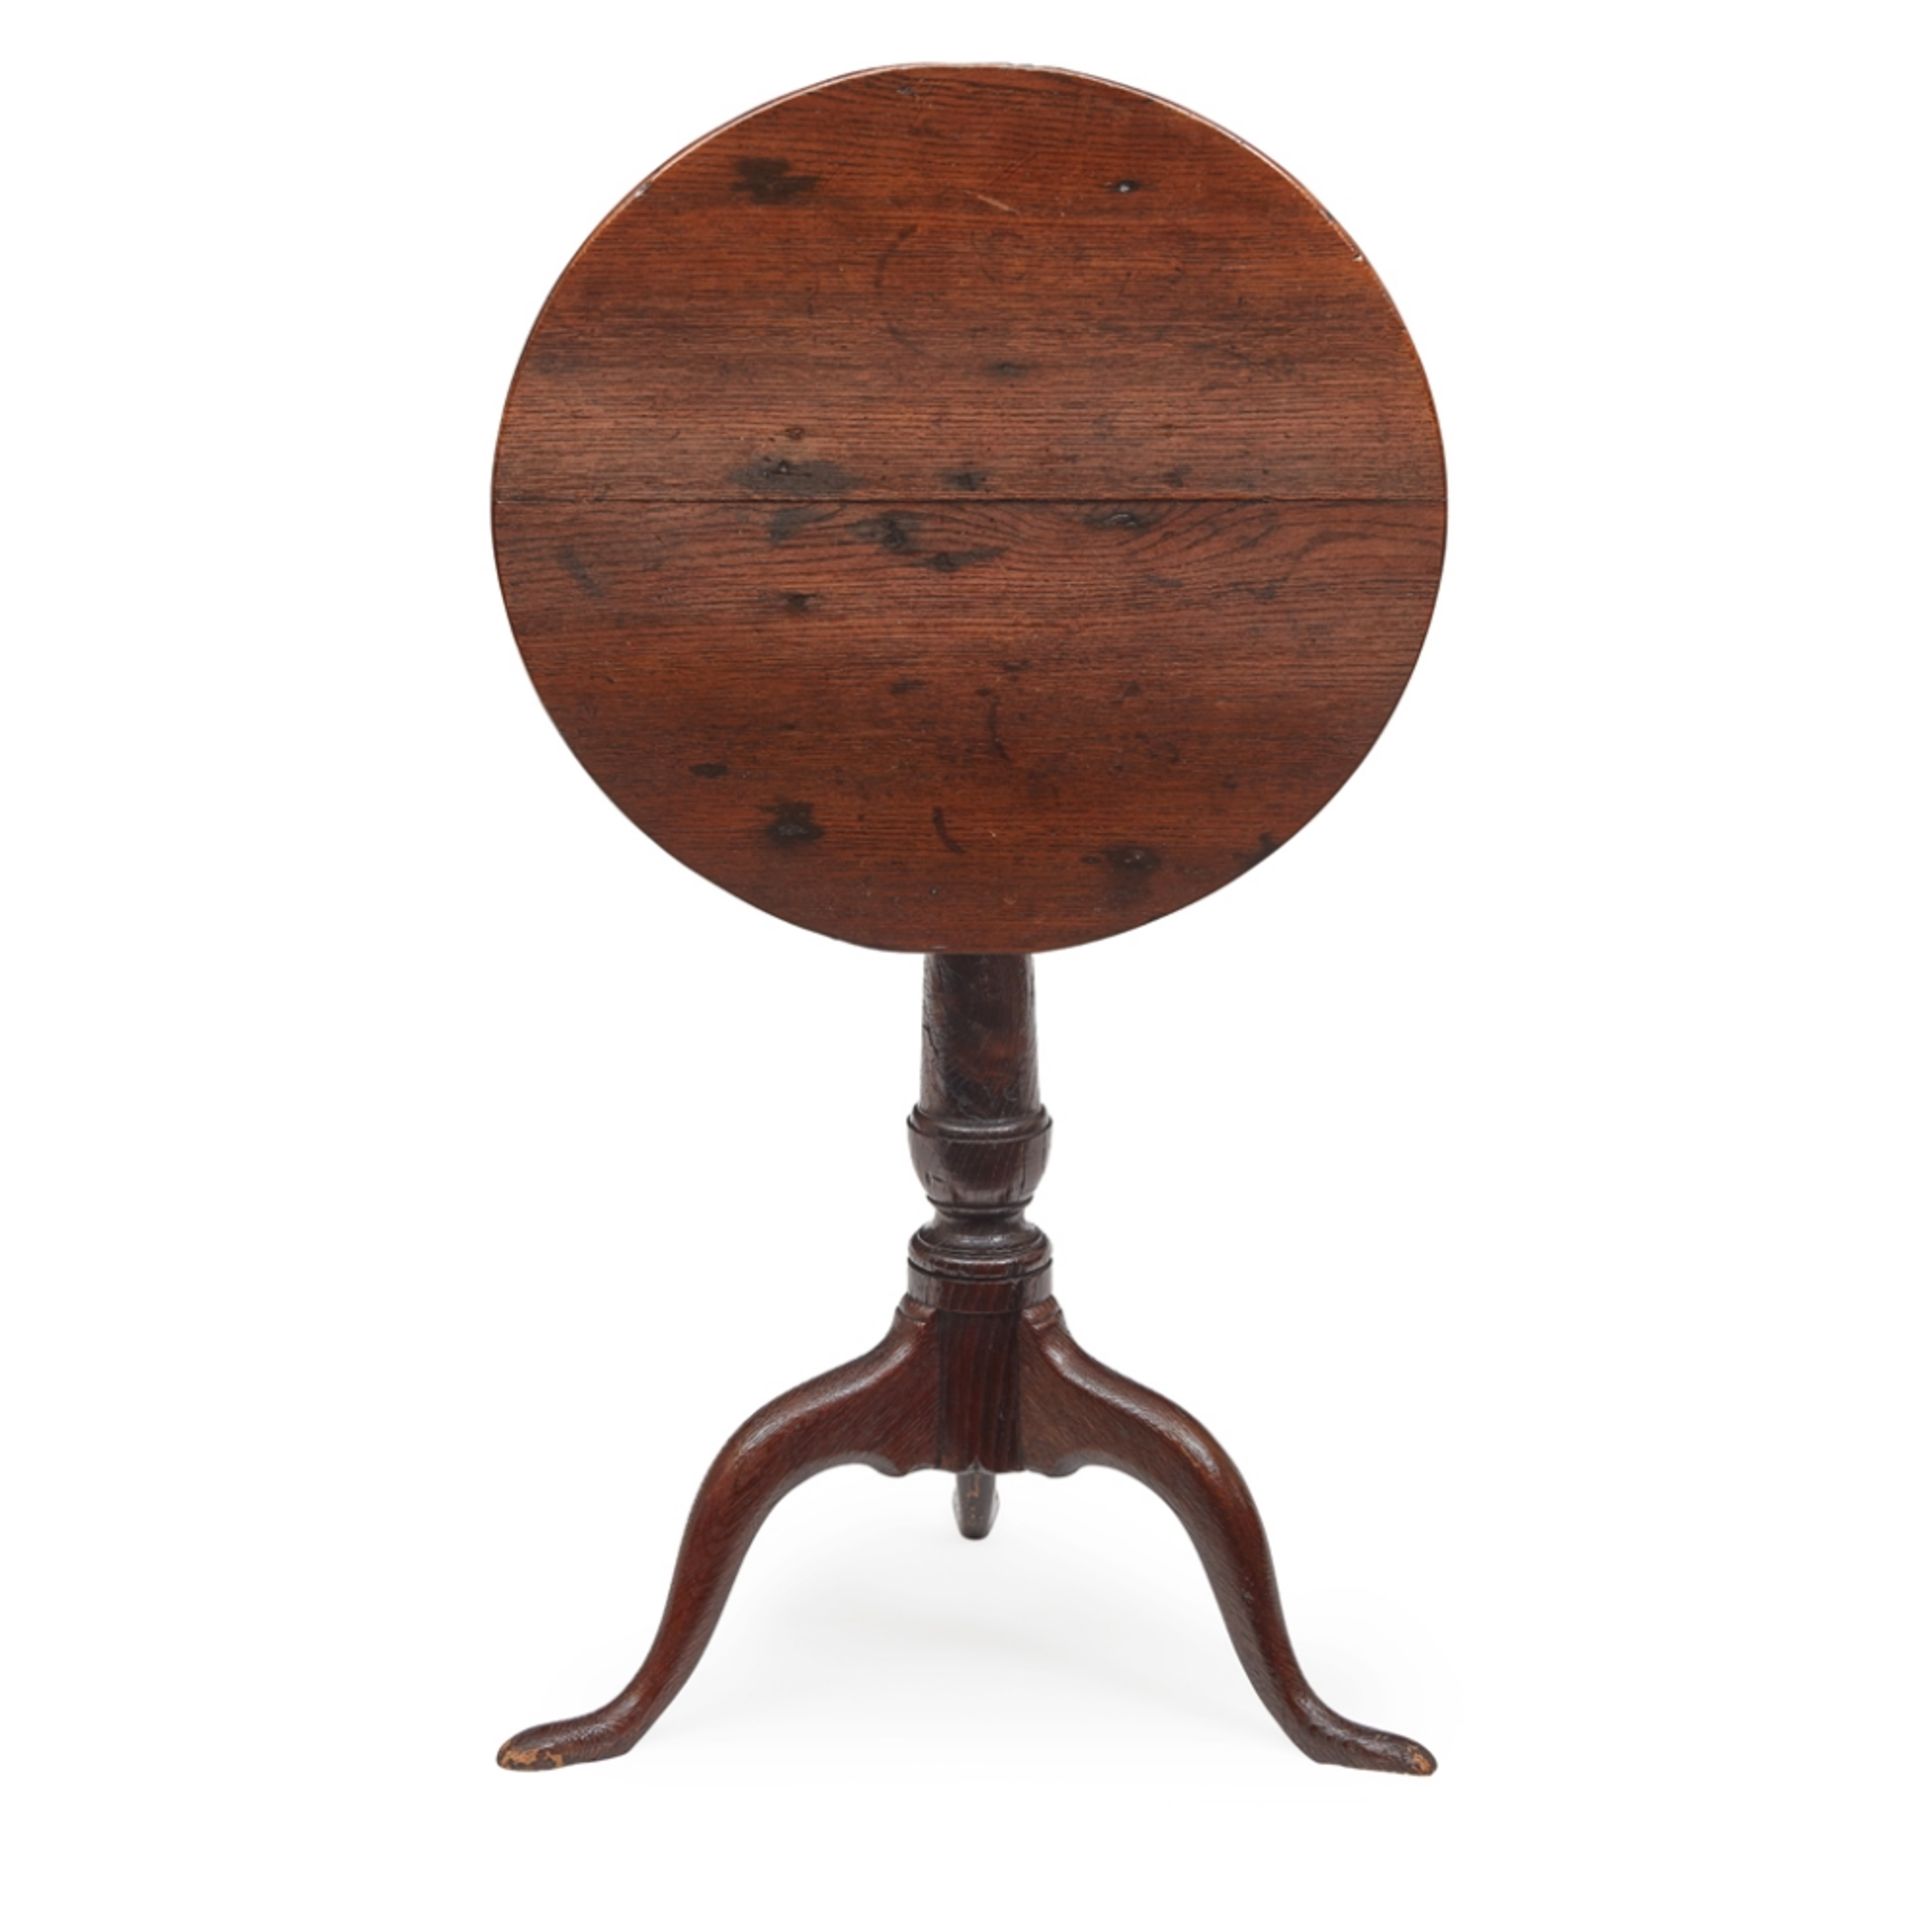 GEORGE III OAK TILT-TOP OCCASIONAL TABLE 18TH CENTURY with a plain circular top raised on a